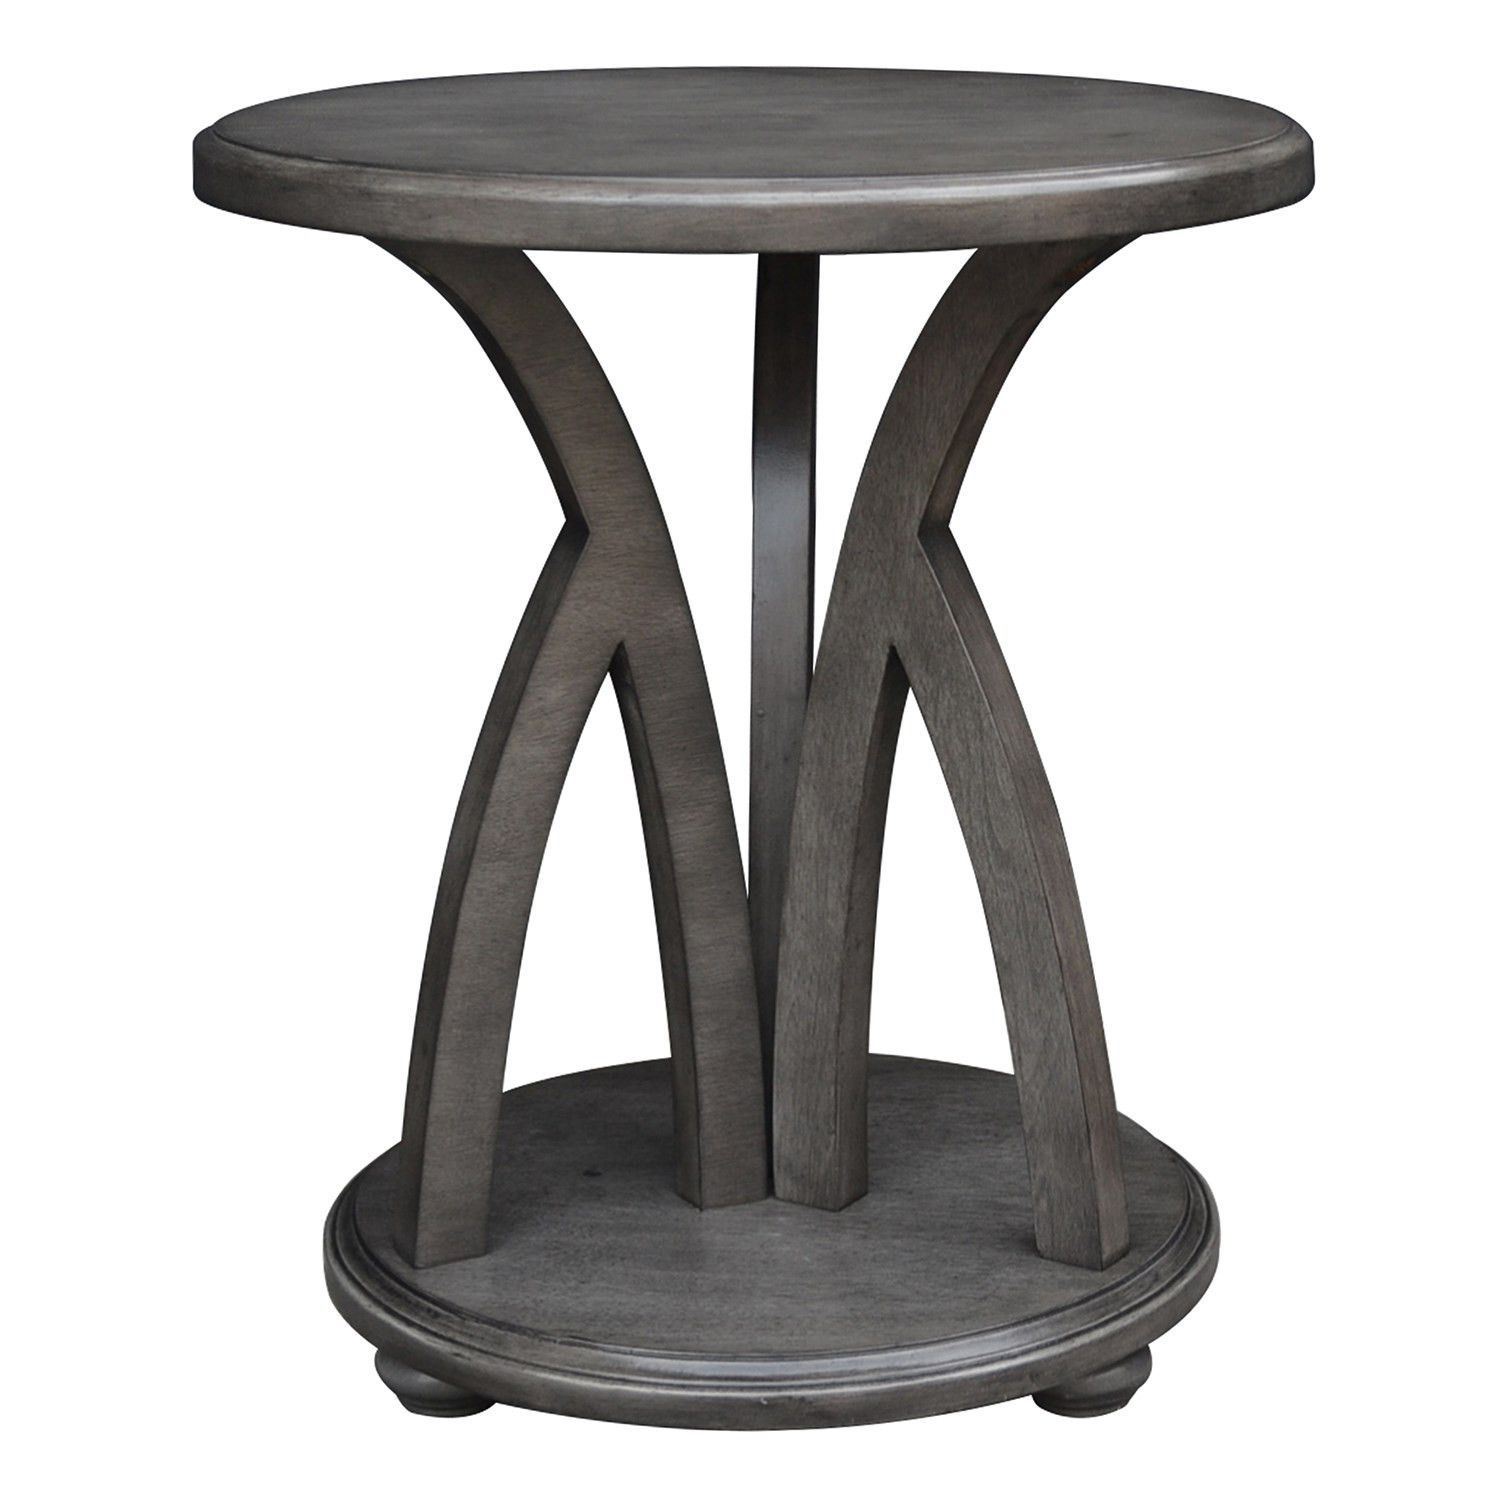 crestview brayden grey accent tables products wood table pottery barn night round glass coffee side for living room inch tablecloth target end old door ideas small space bedroom